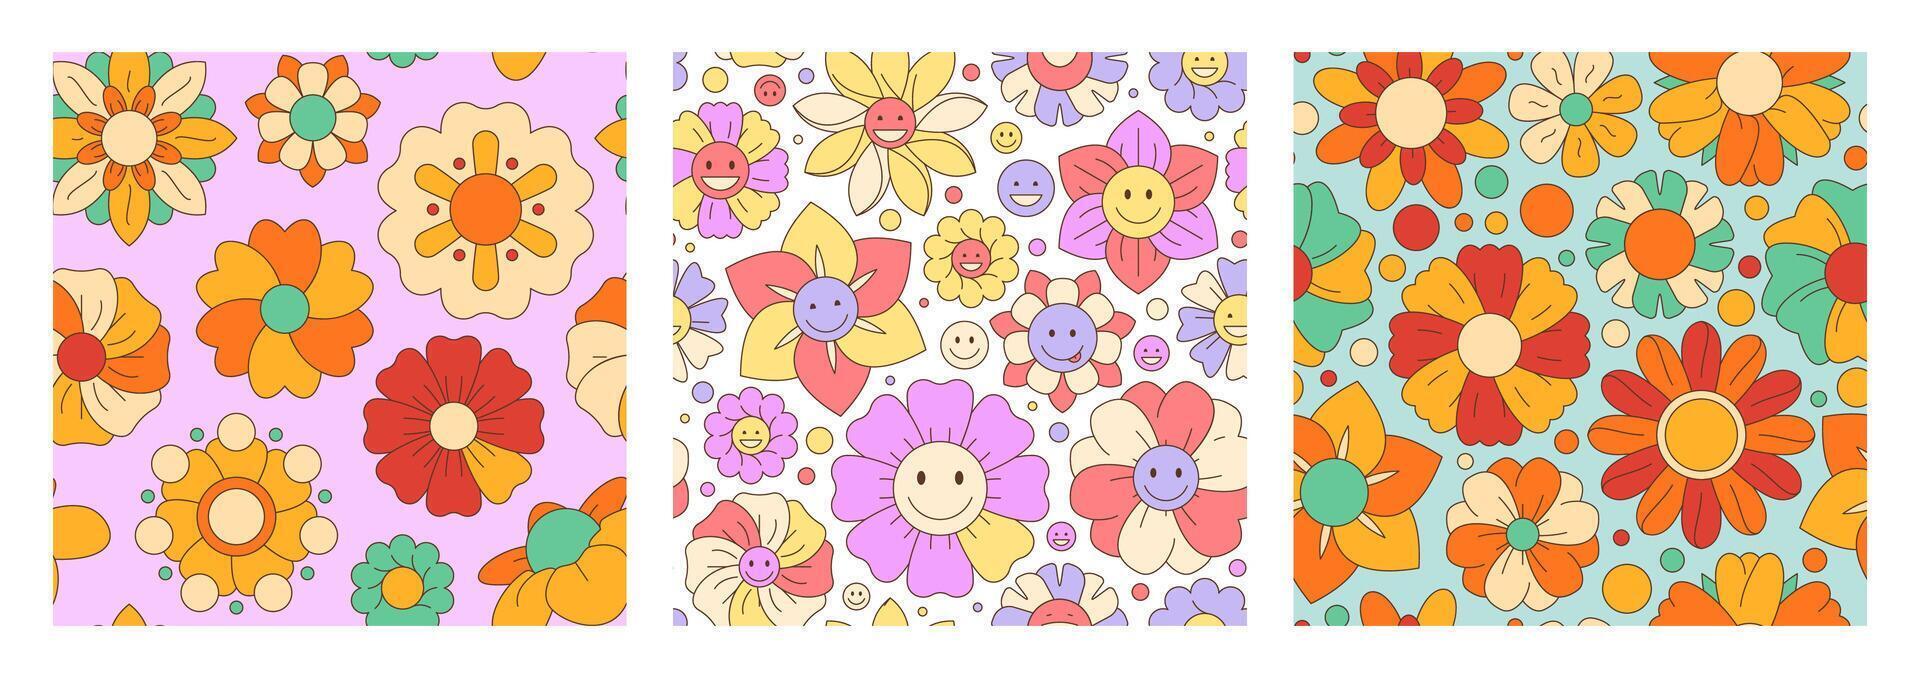 Groovy flowers pattern. Psychedelic abstract floral wallpaper print for spring summer hippie decor, cheerful flower hippie graphic. Vector floral design